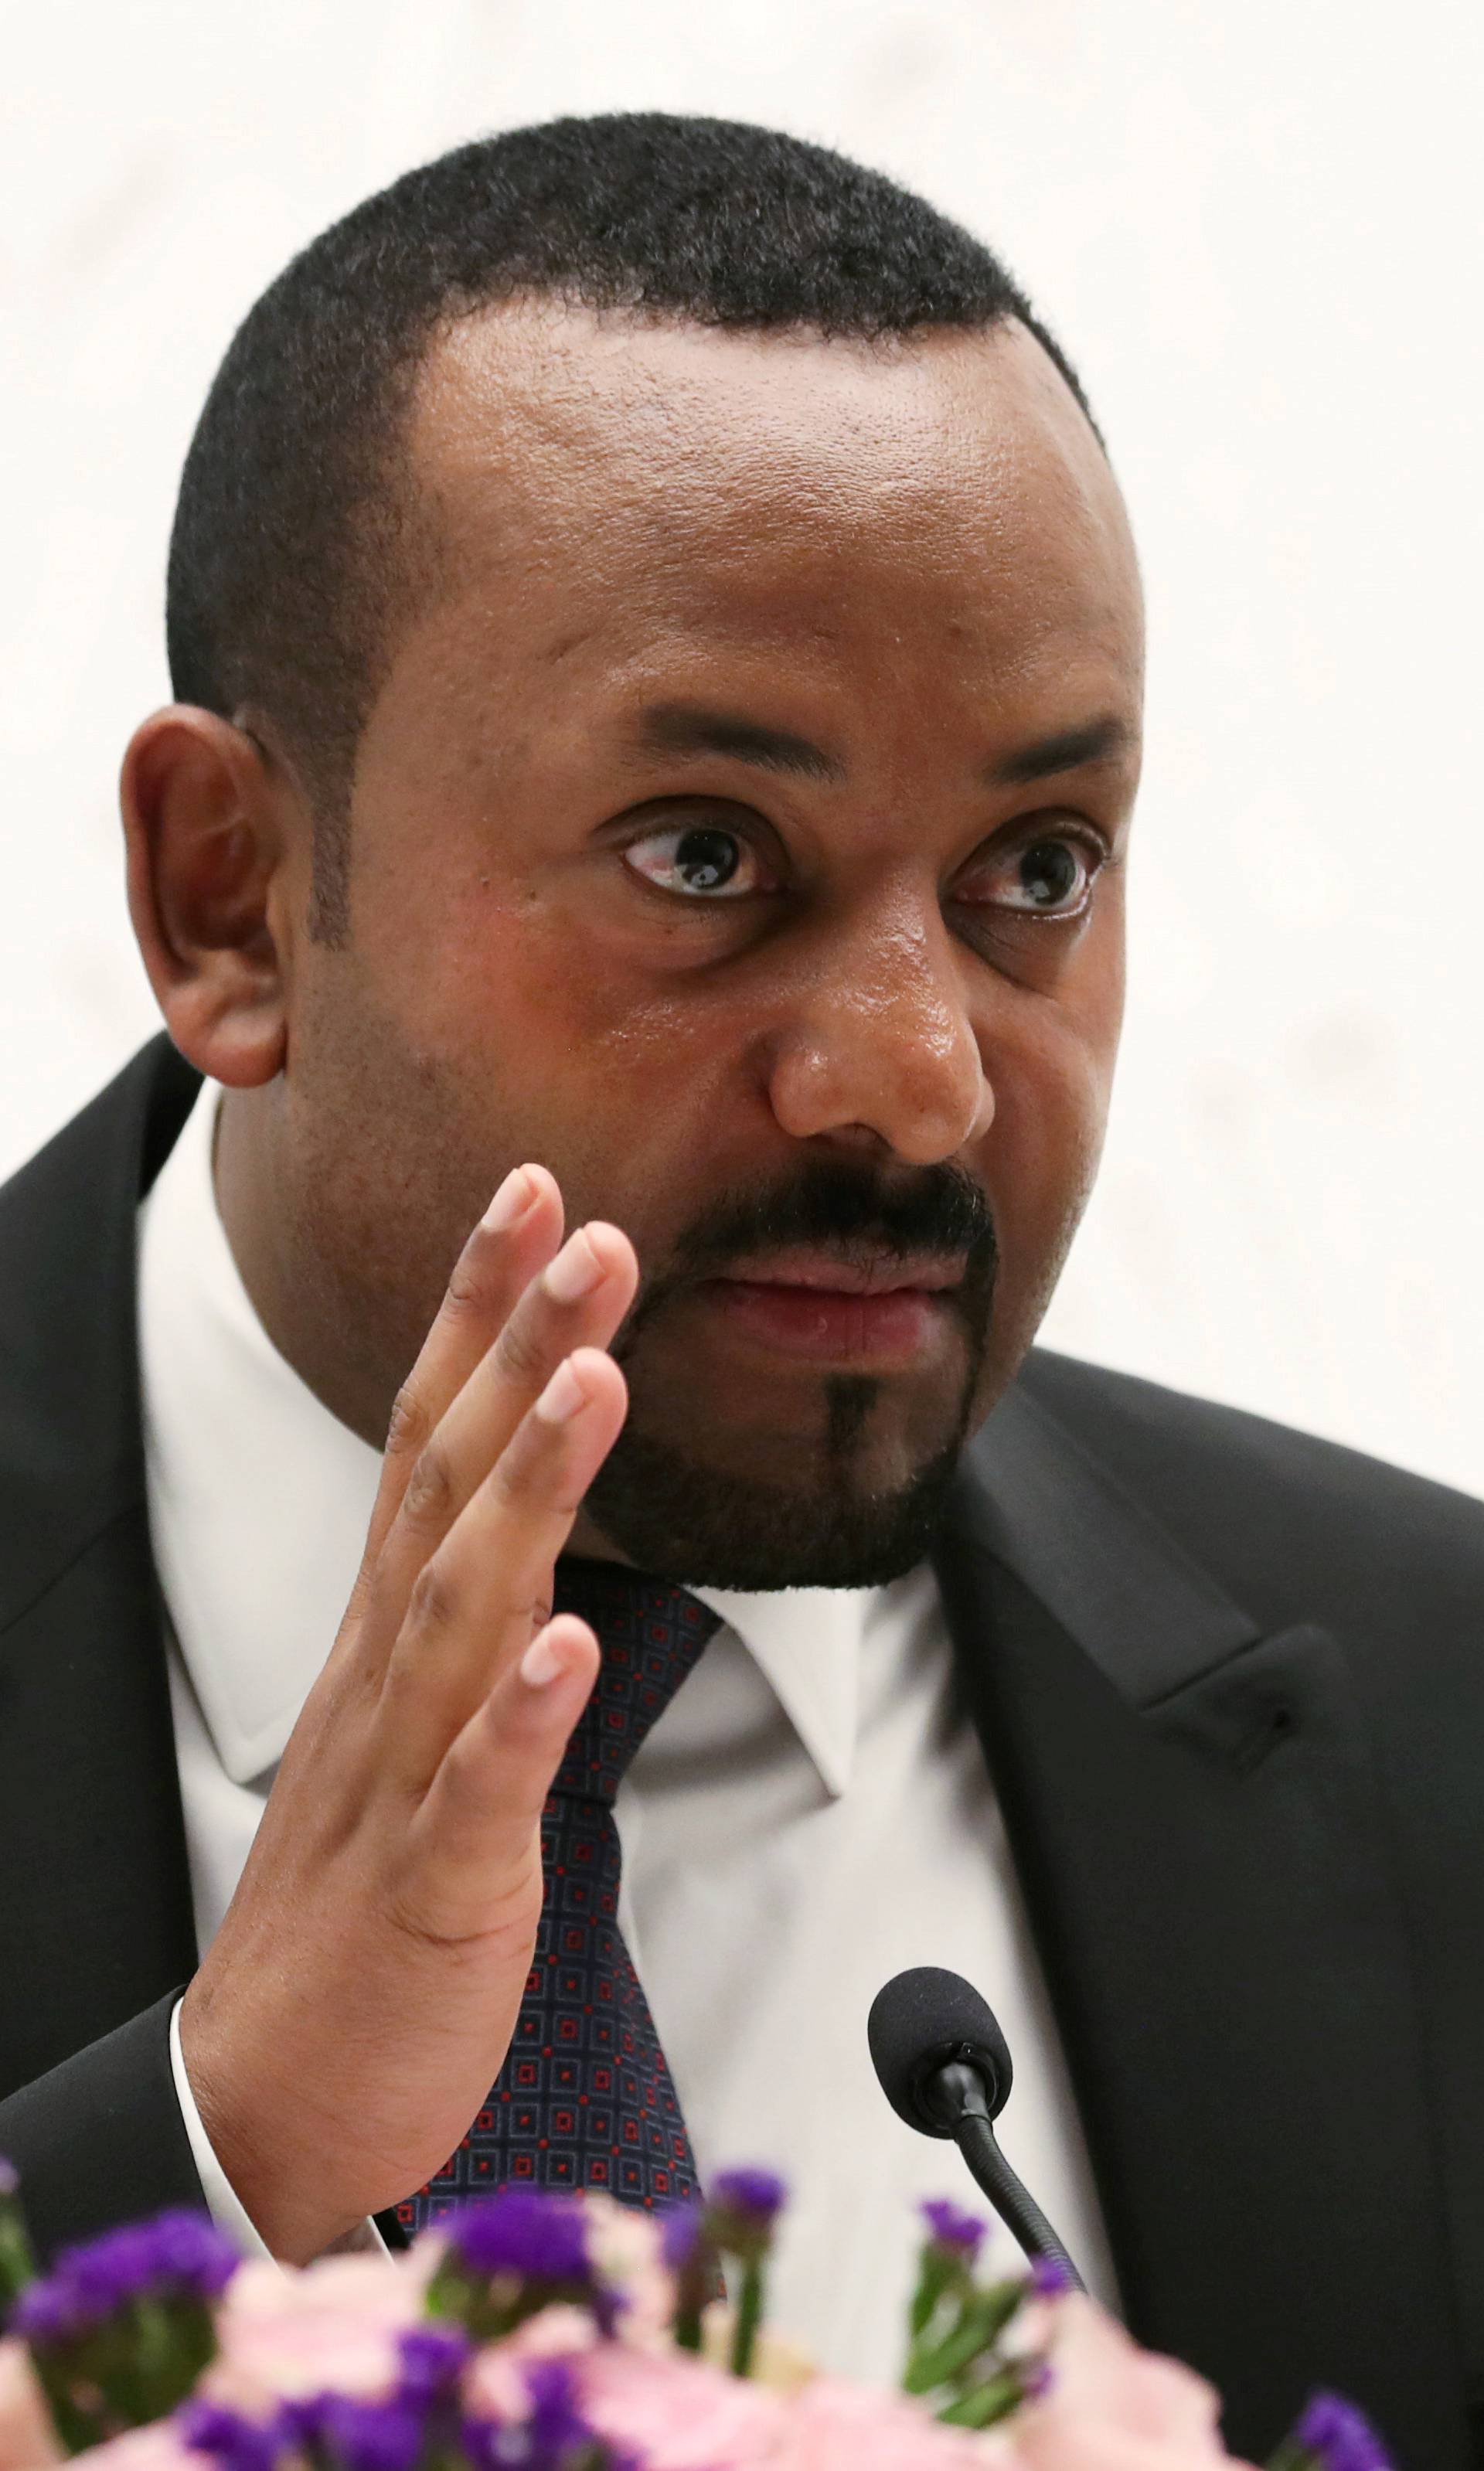 FILE PHOTO: Ethiopia's Prime Minister Abiy Ahmed speaks at a news conference at his office in Addis Ababa